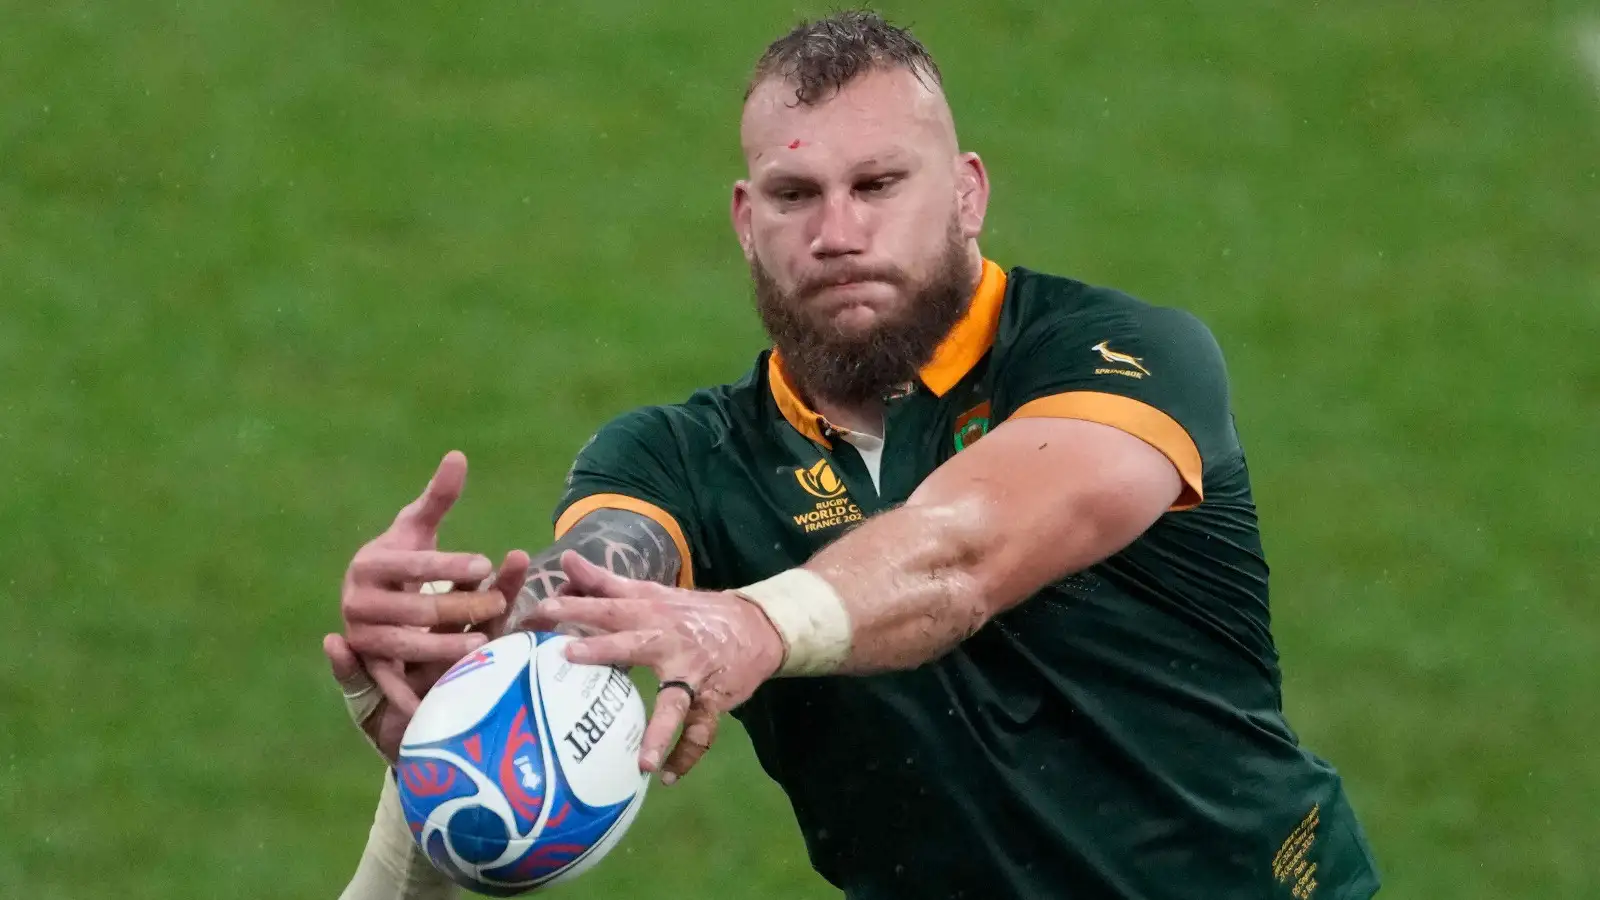 RG Snyman in action for the Springboks during the Rugby World Cup.